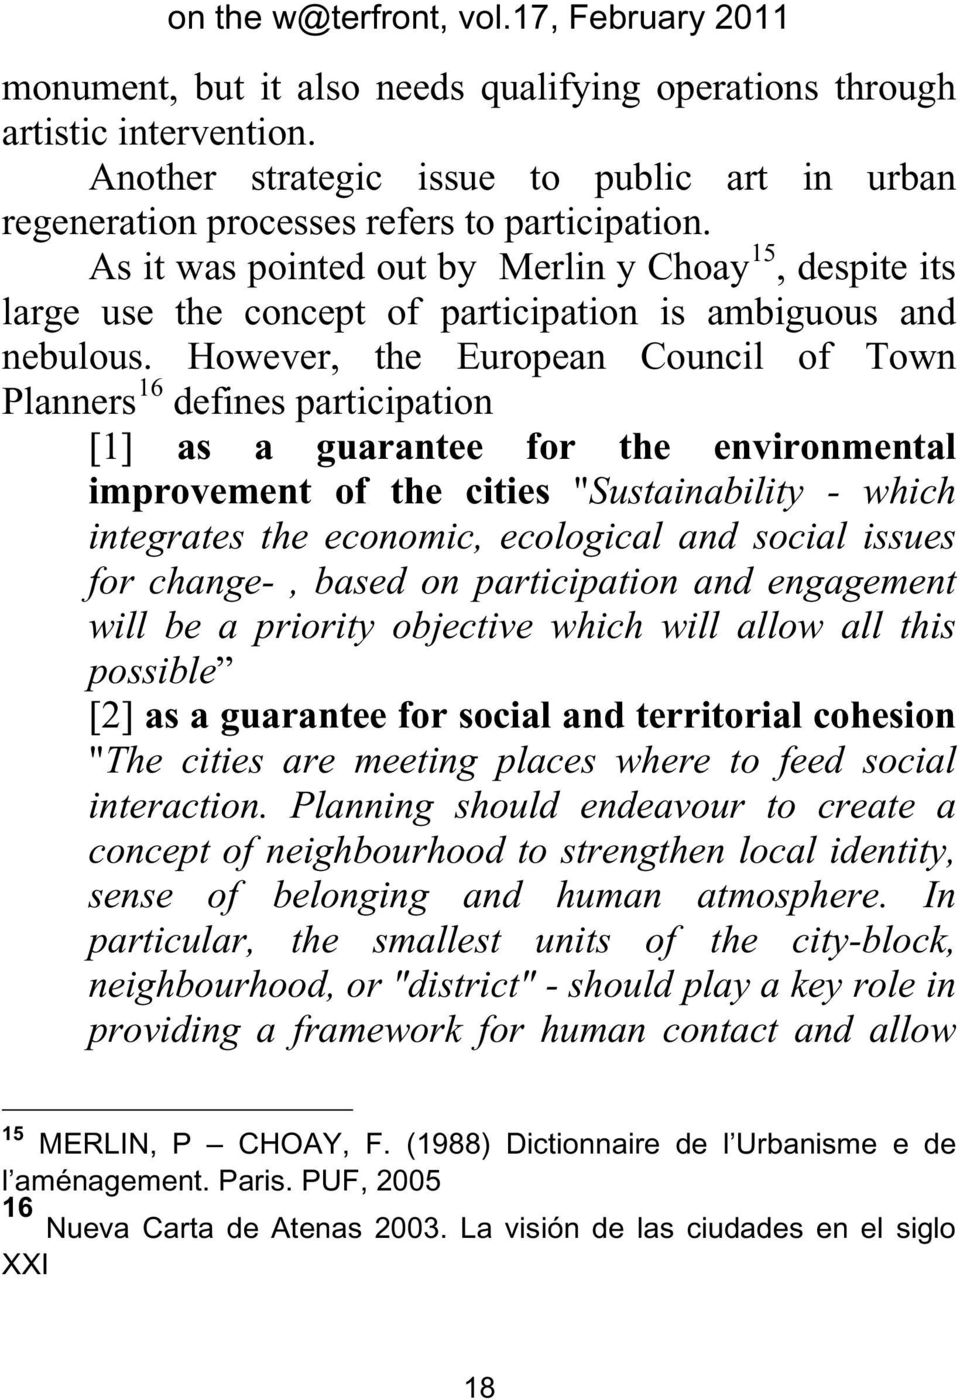 However, the European Council of Town Planners 16 defines participation [1] as a guarantee for the environmental improvement of the cities "Sustainability - which integrates the economic, ecological